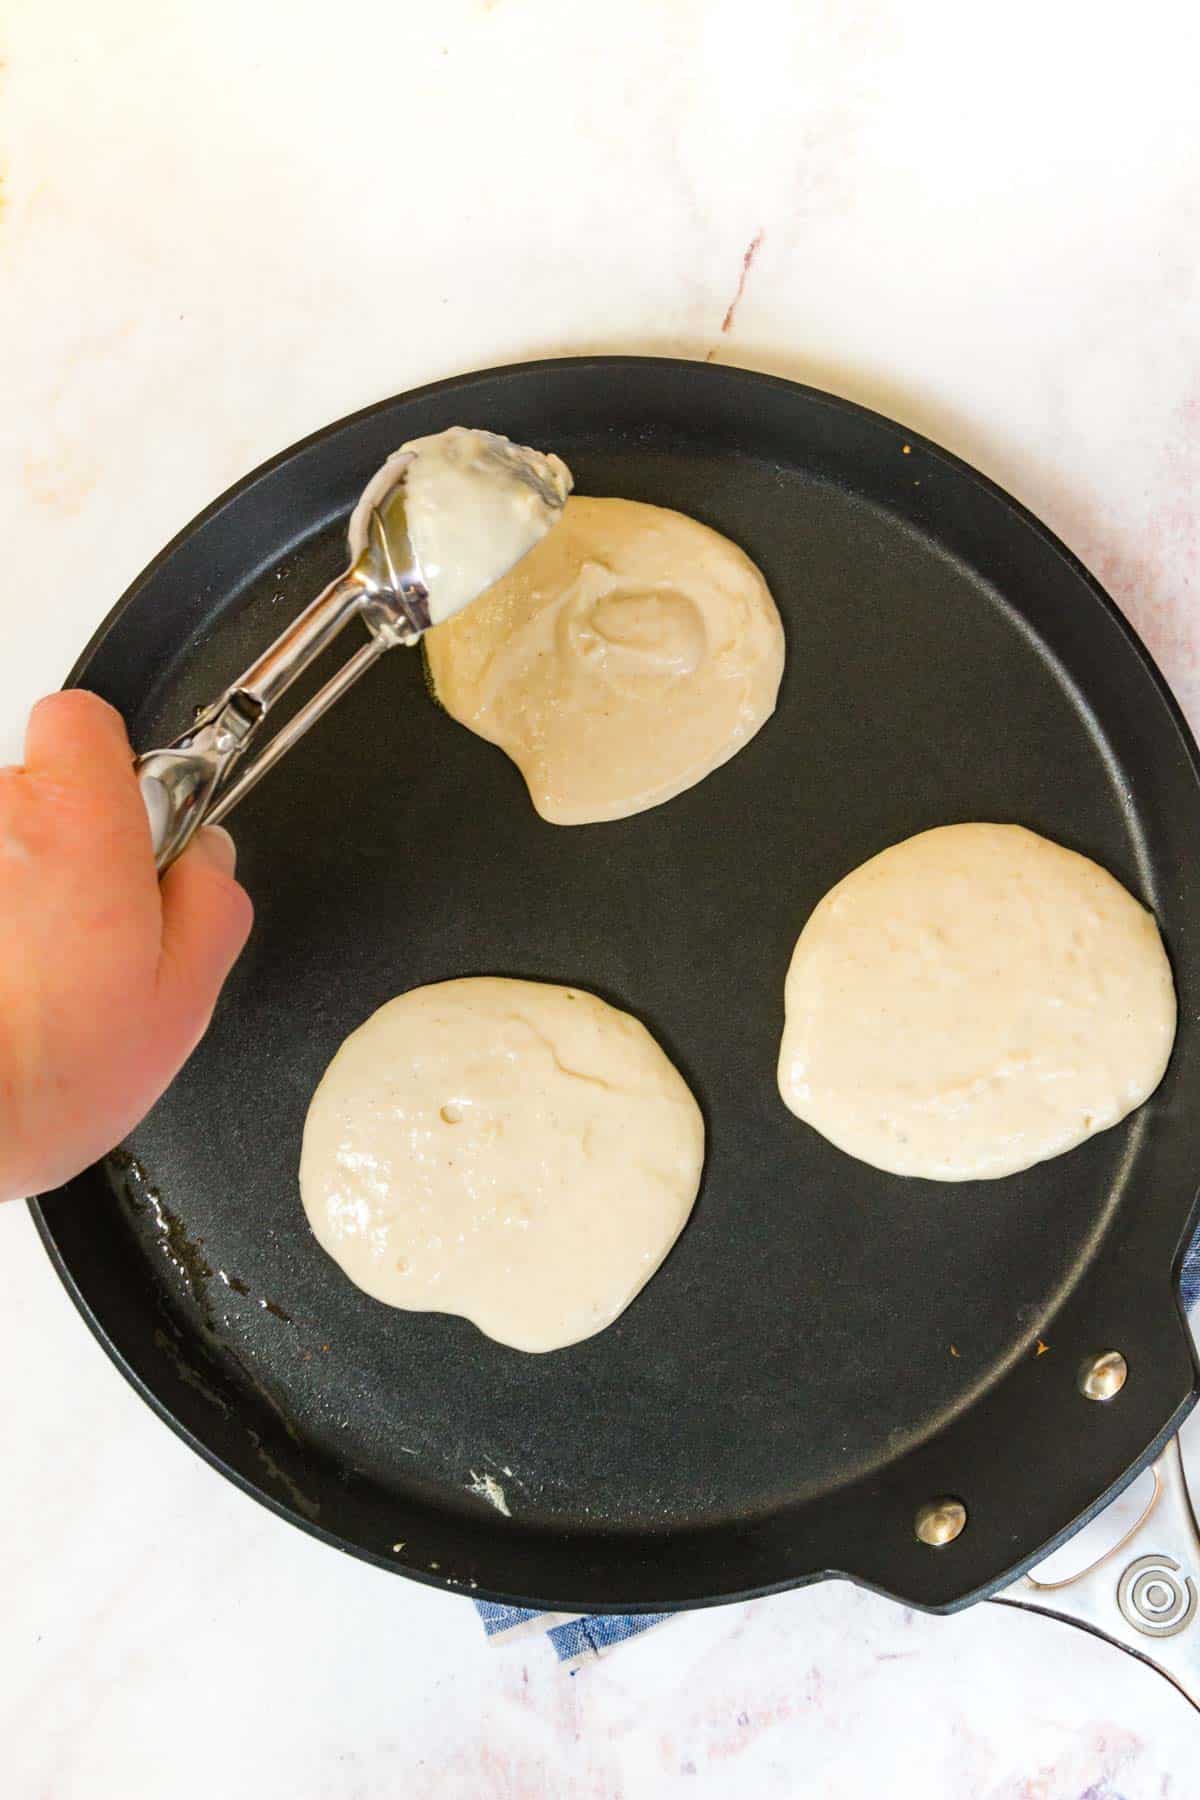 A scoop is used to drop pancake batter onto a hot griddle.